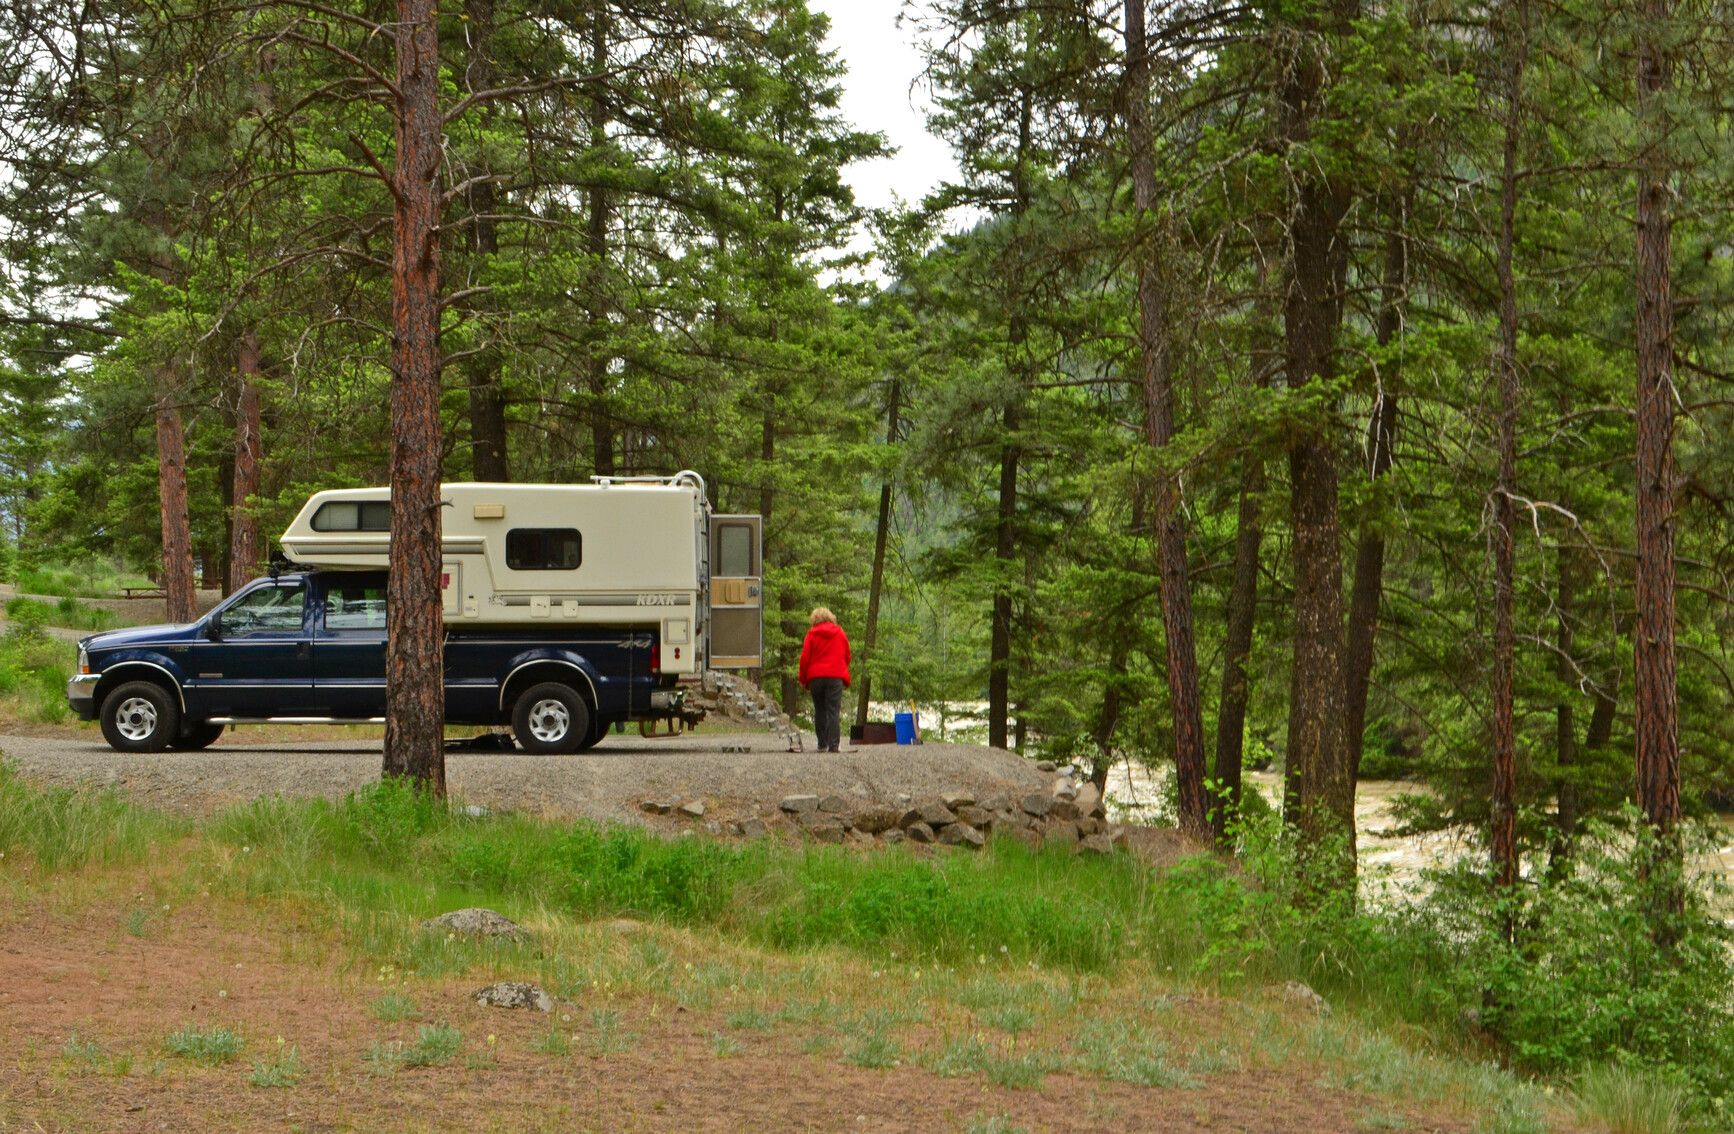 Explore the stunning campsites along the Similkameen River at Stemwinder Park.